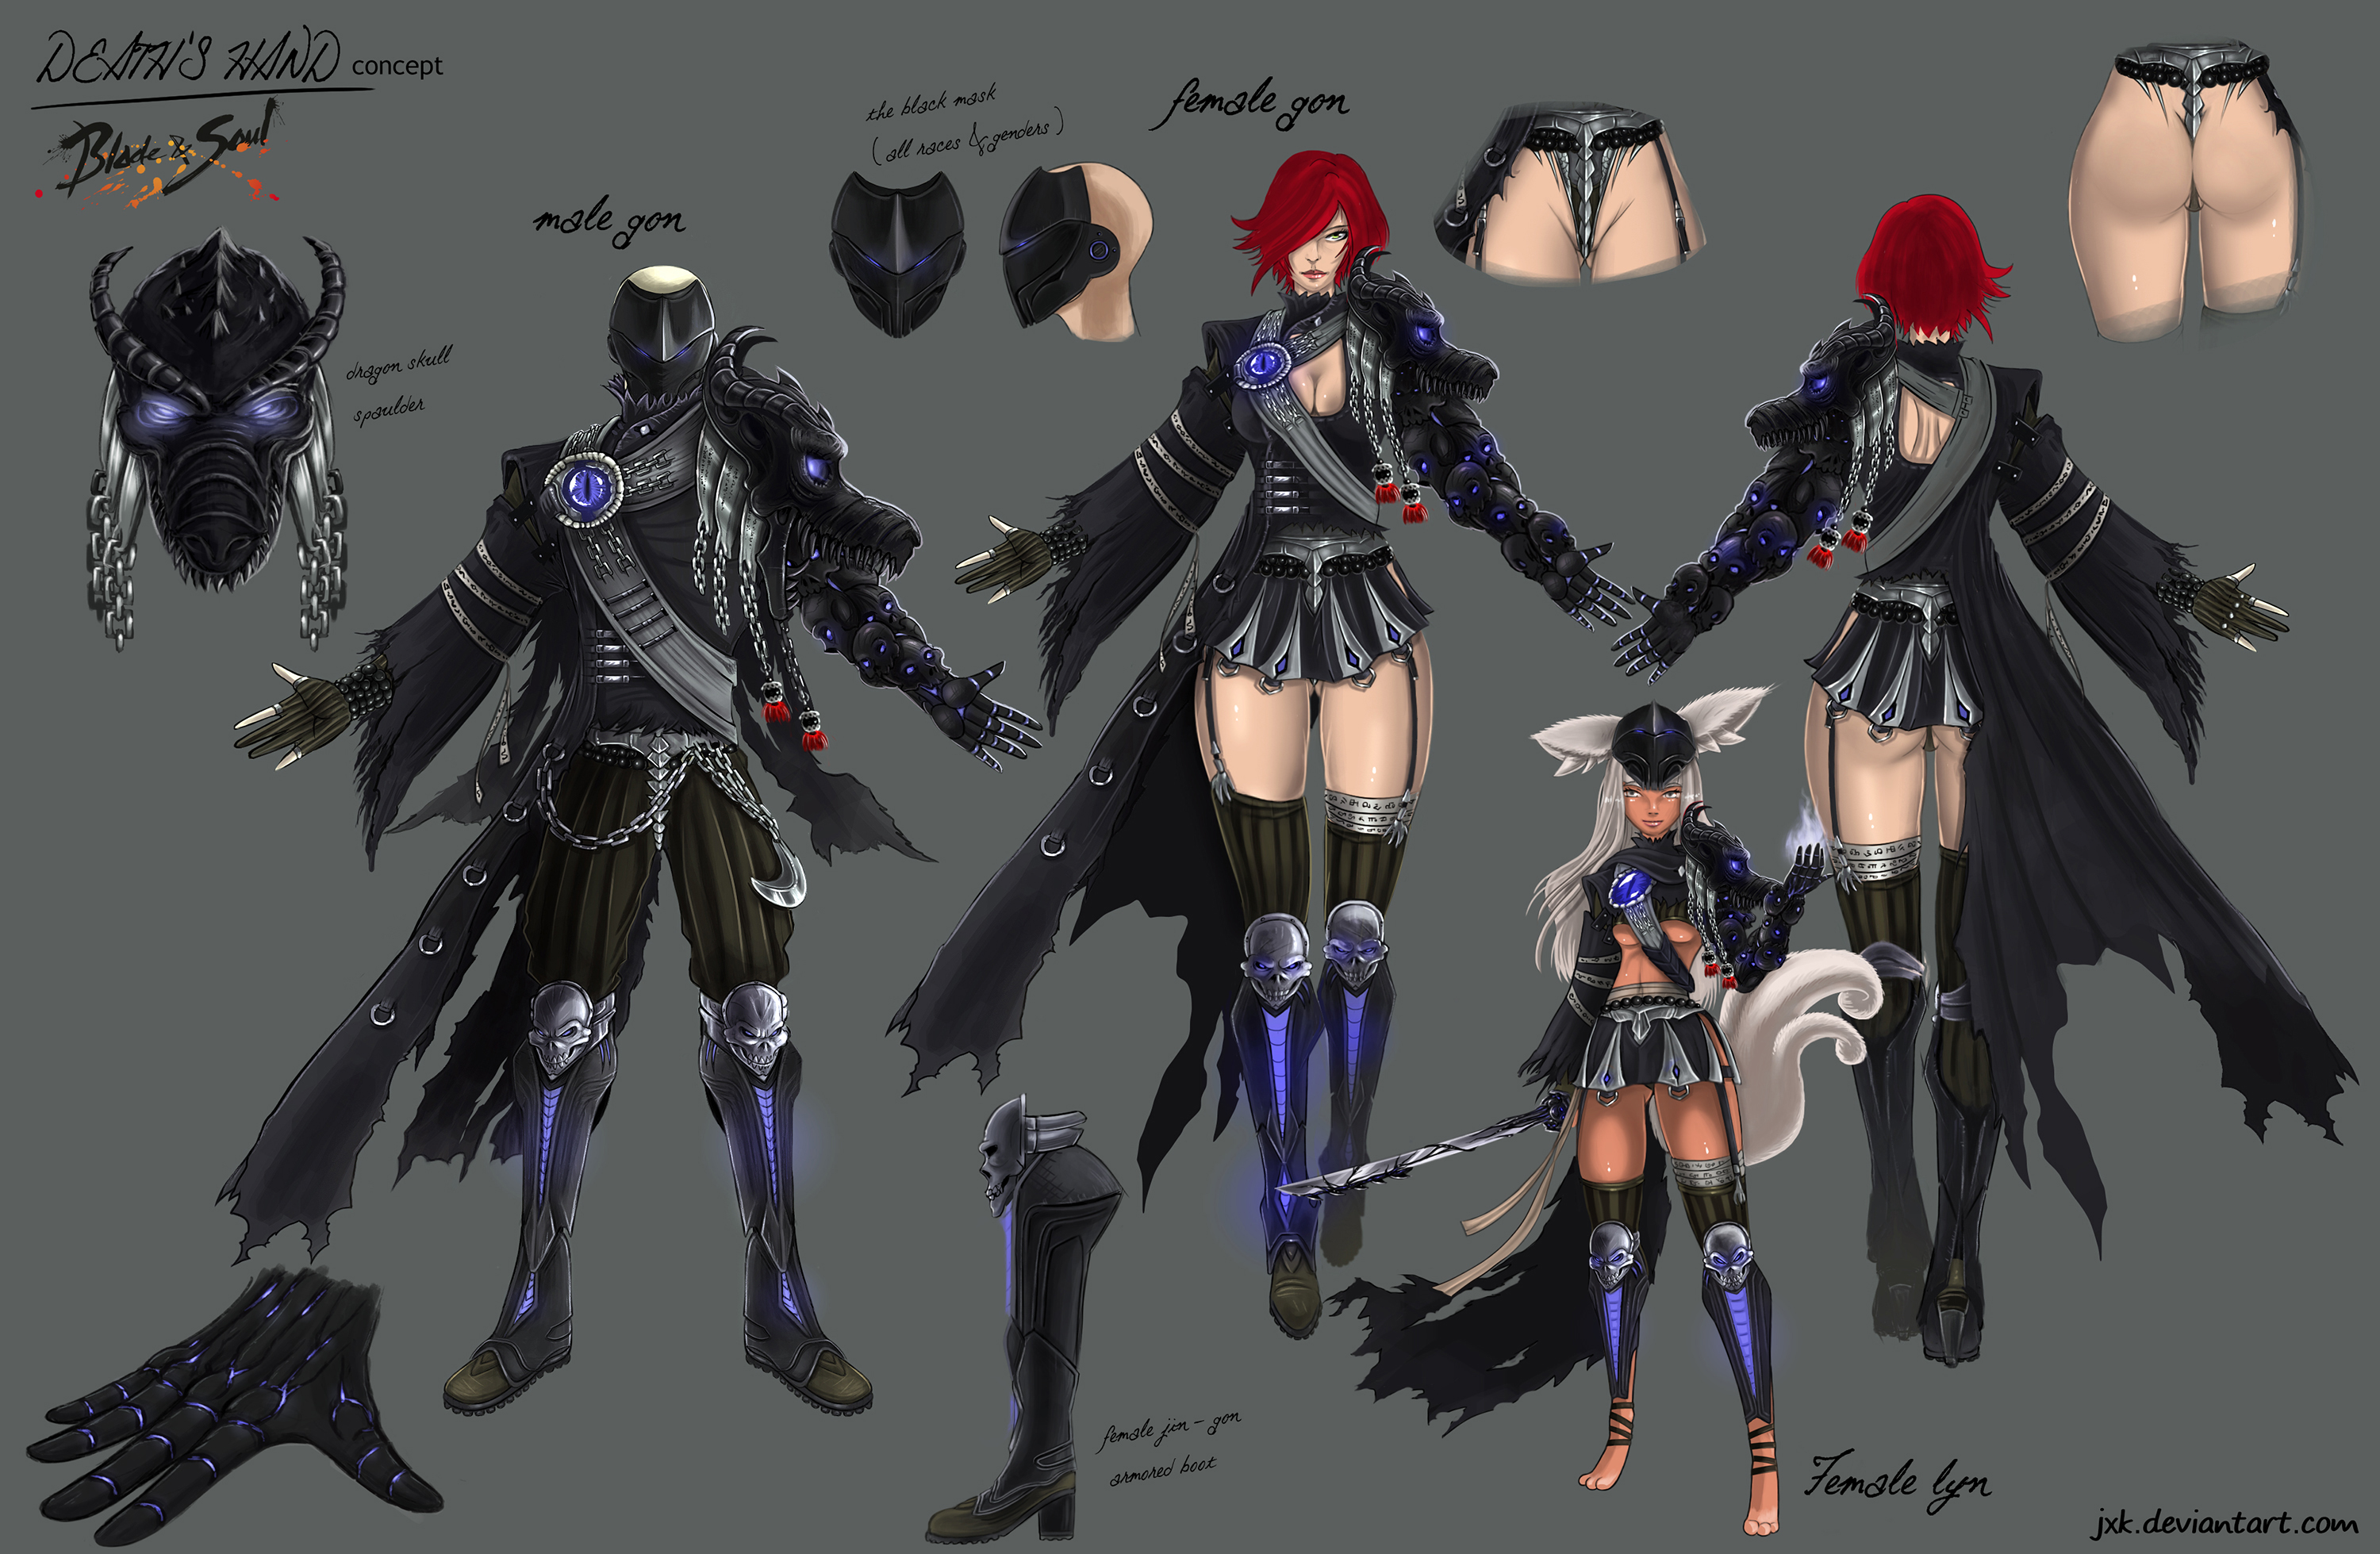 mount Pub Tranquility Blade And Soul Costume Contest by JxK on DeviantArt